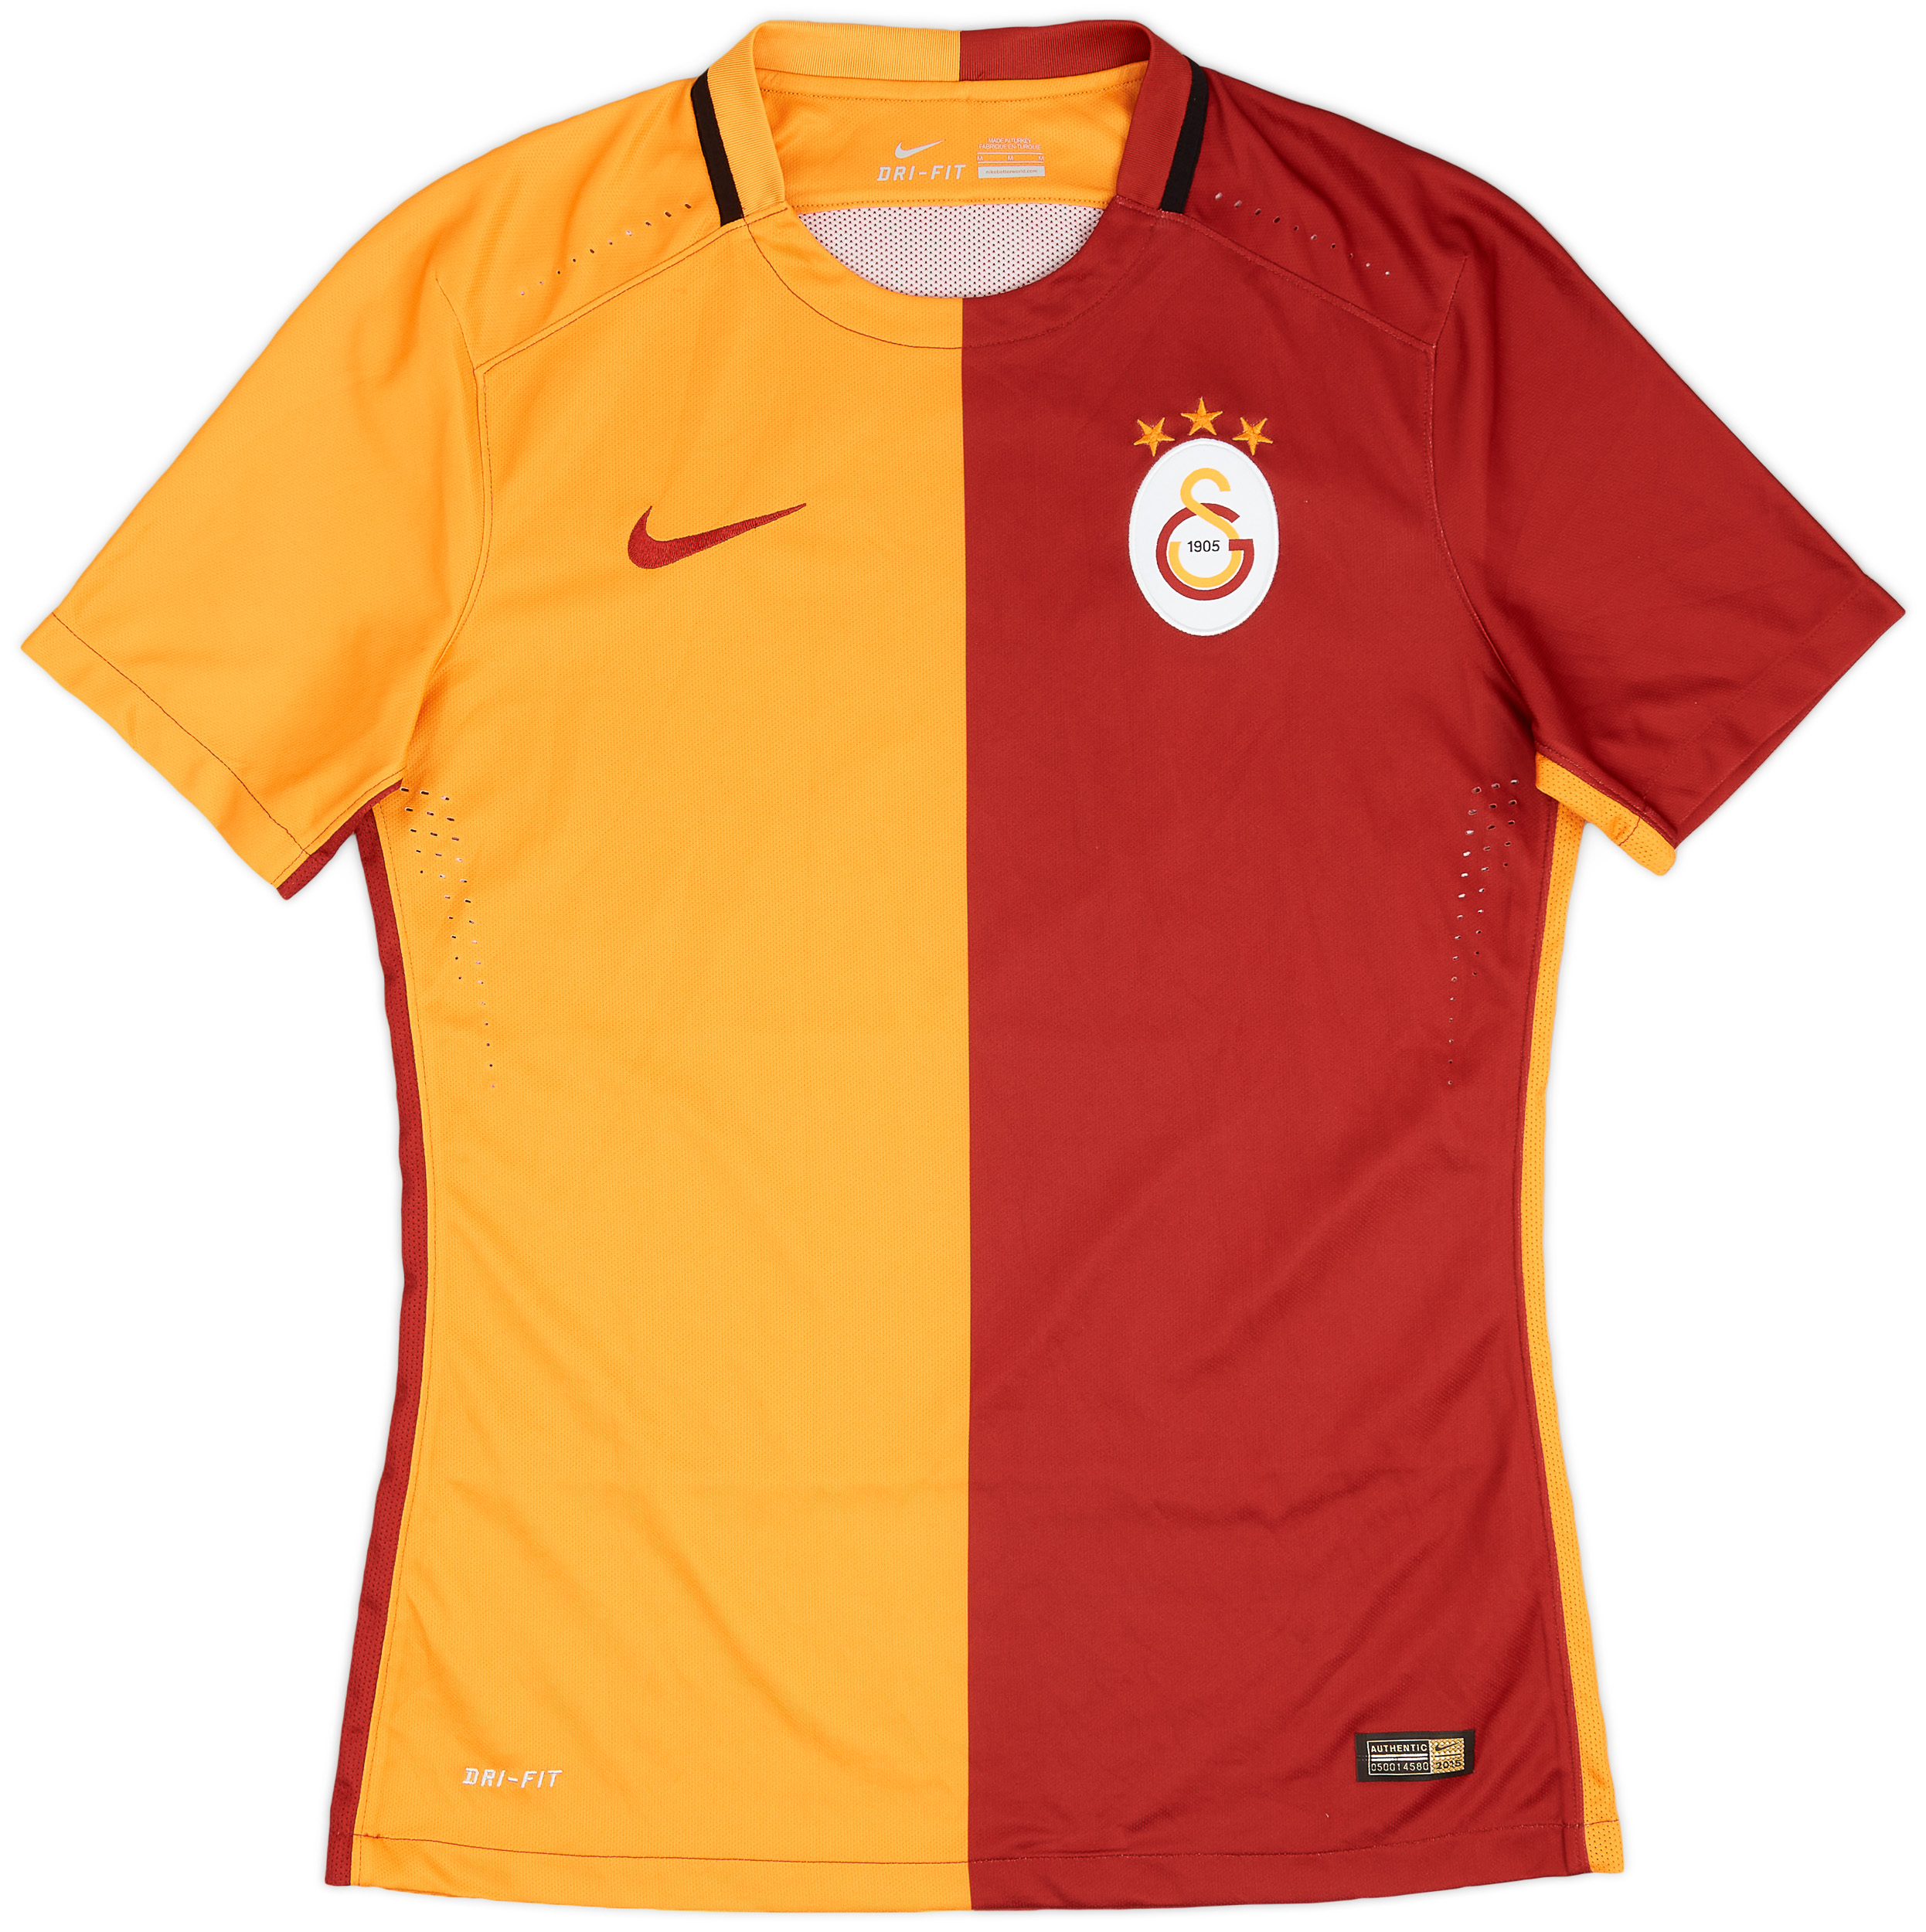 2015-16 Galatasaray Authentic Home Shirt - 10/10 - ()